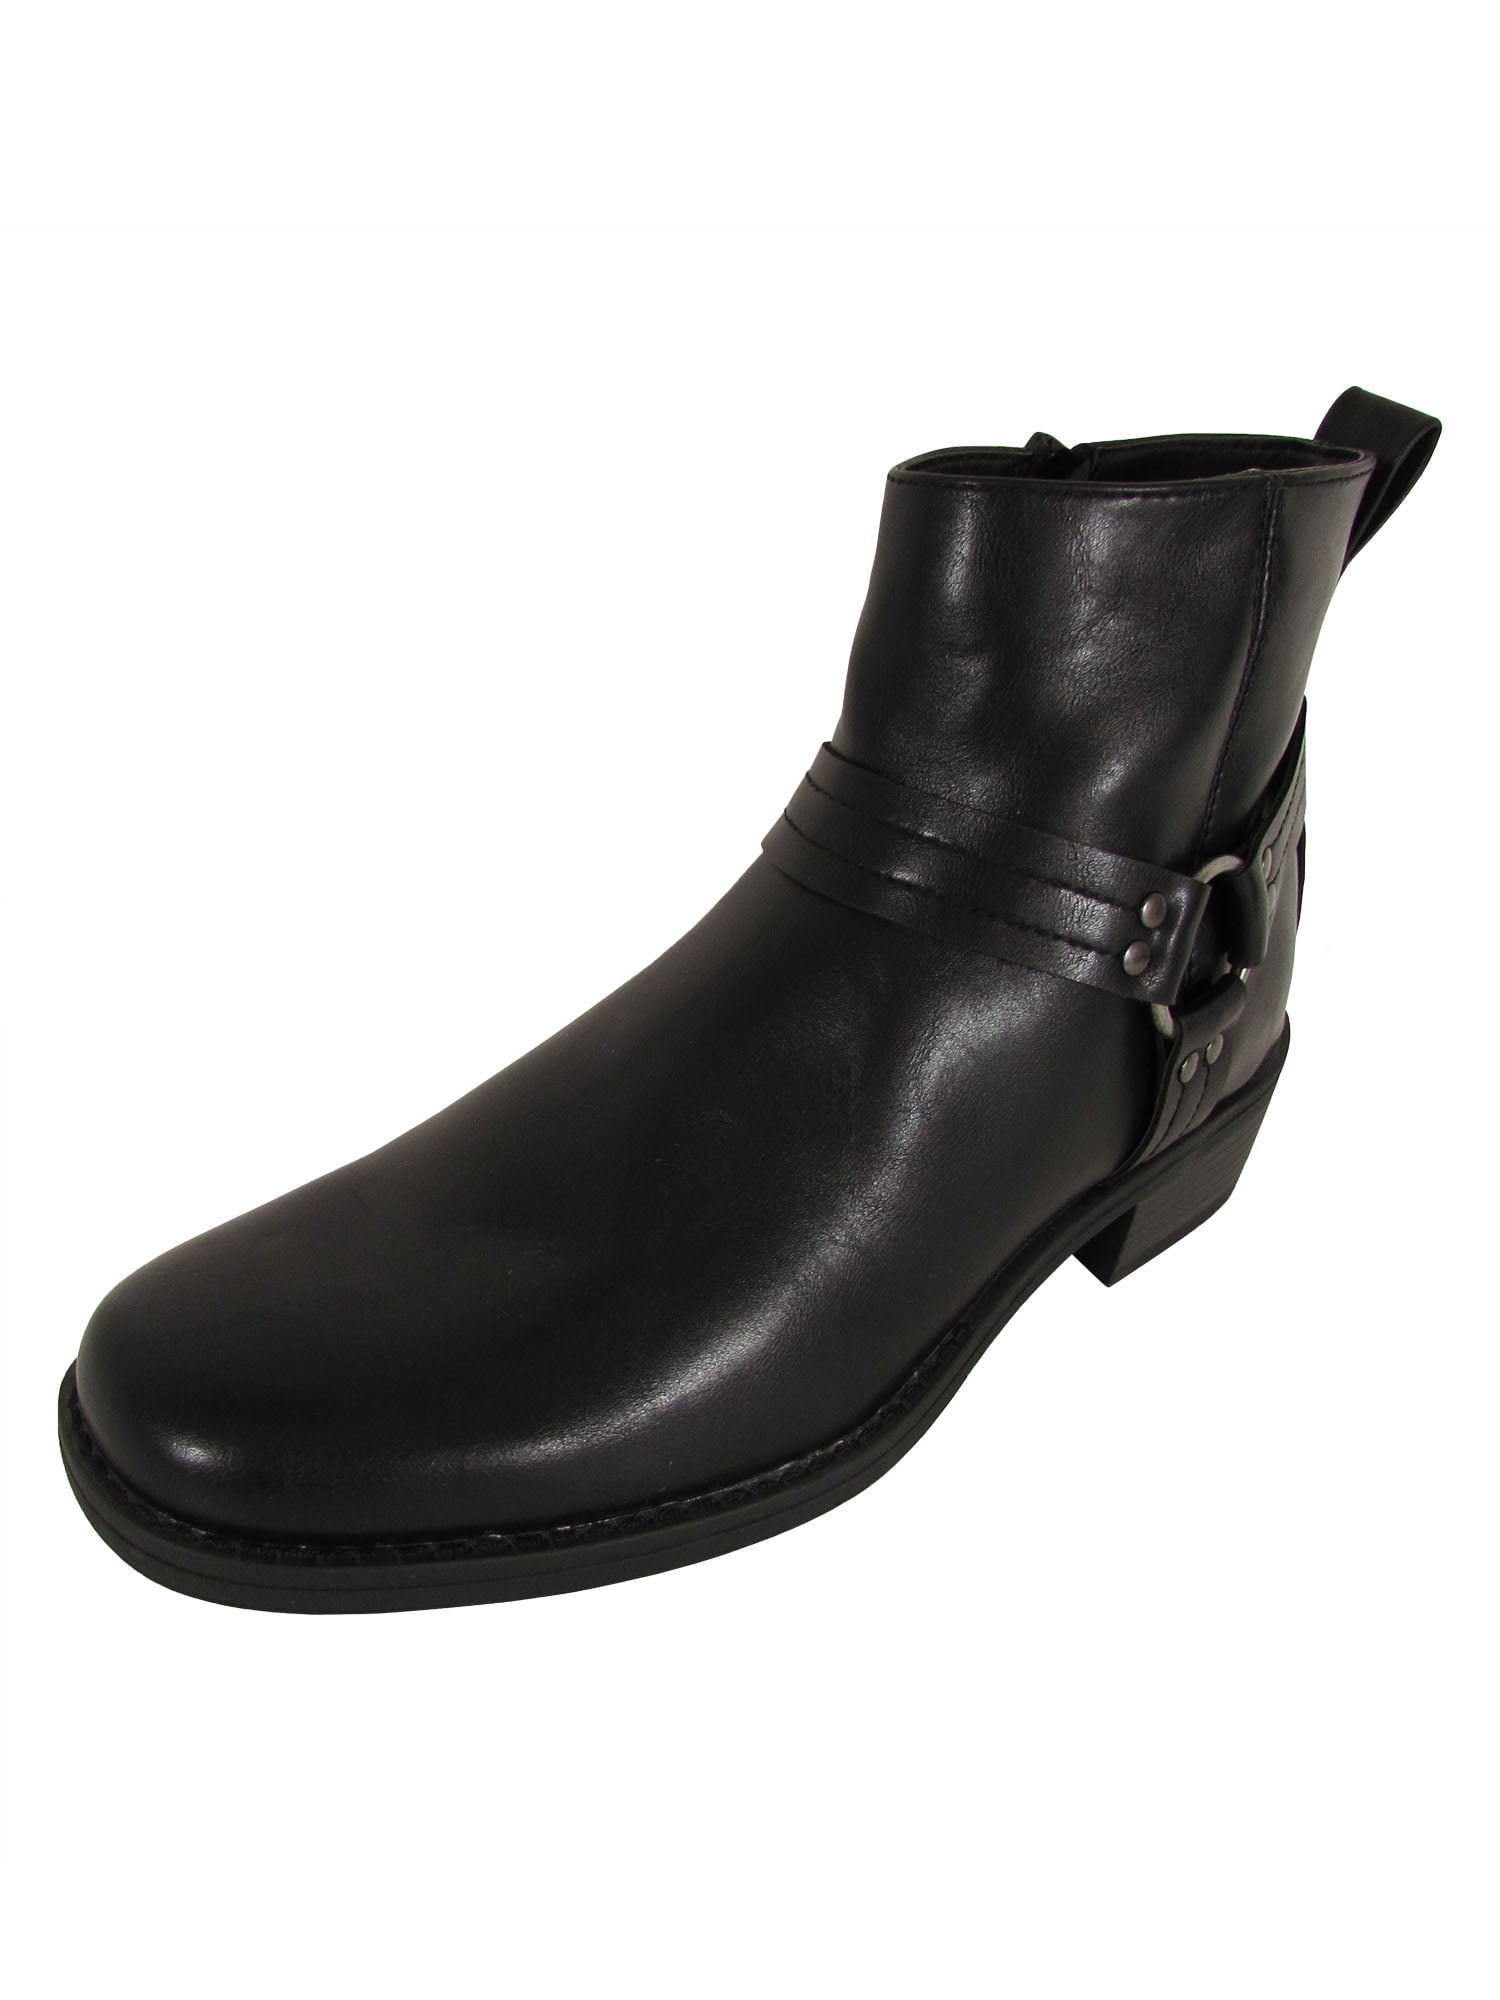 Memphis One Mens Harness Motorcycle Ankle Boot Shoes - Walmart.com